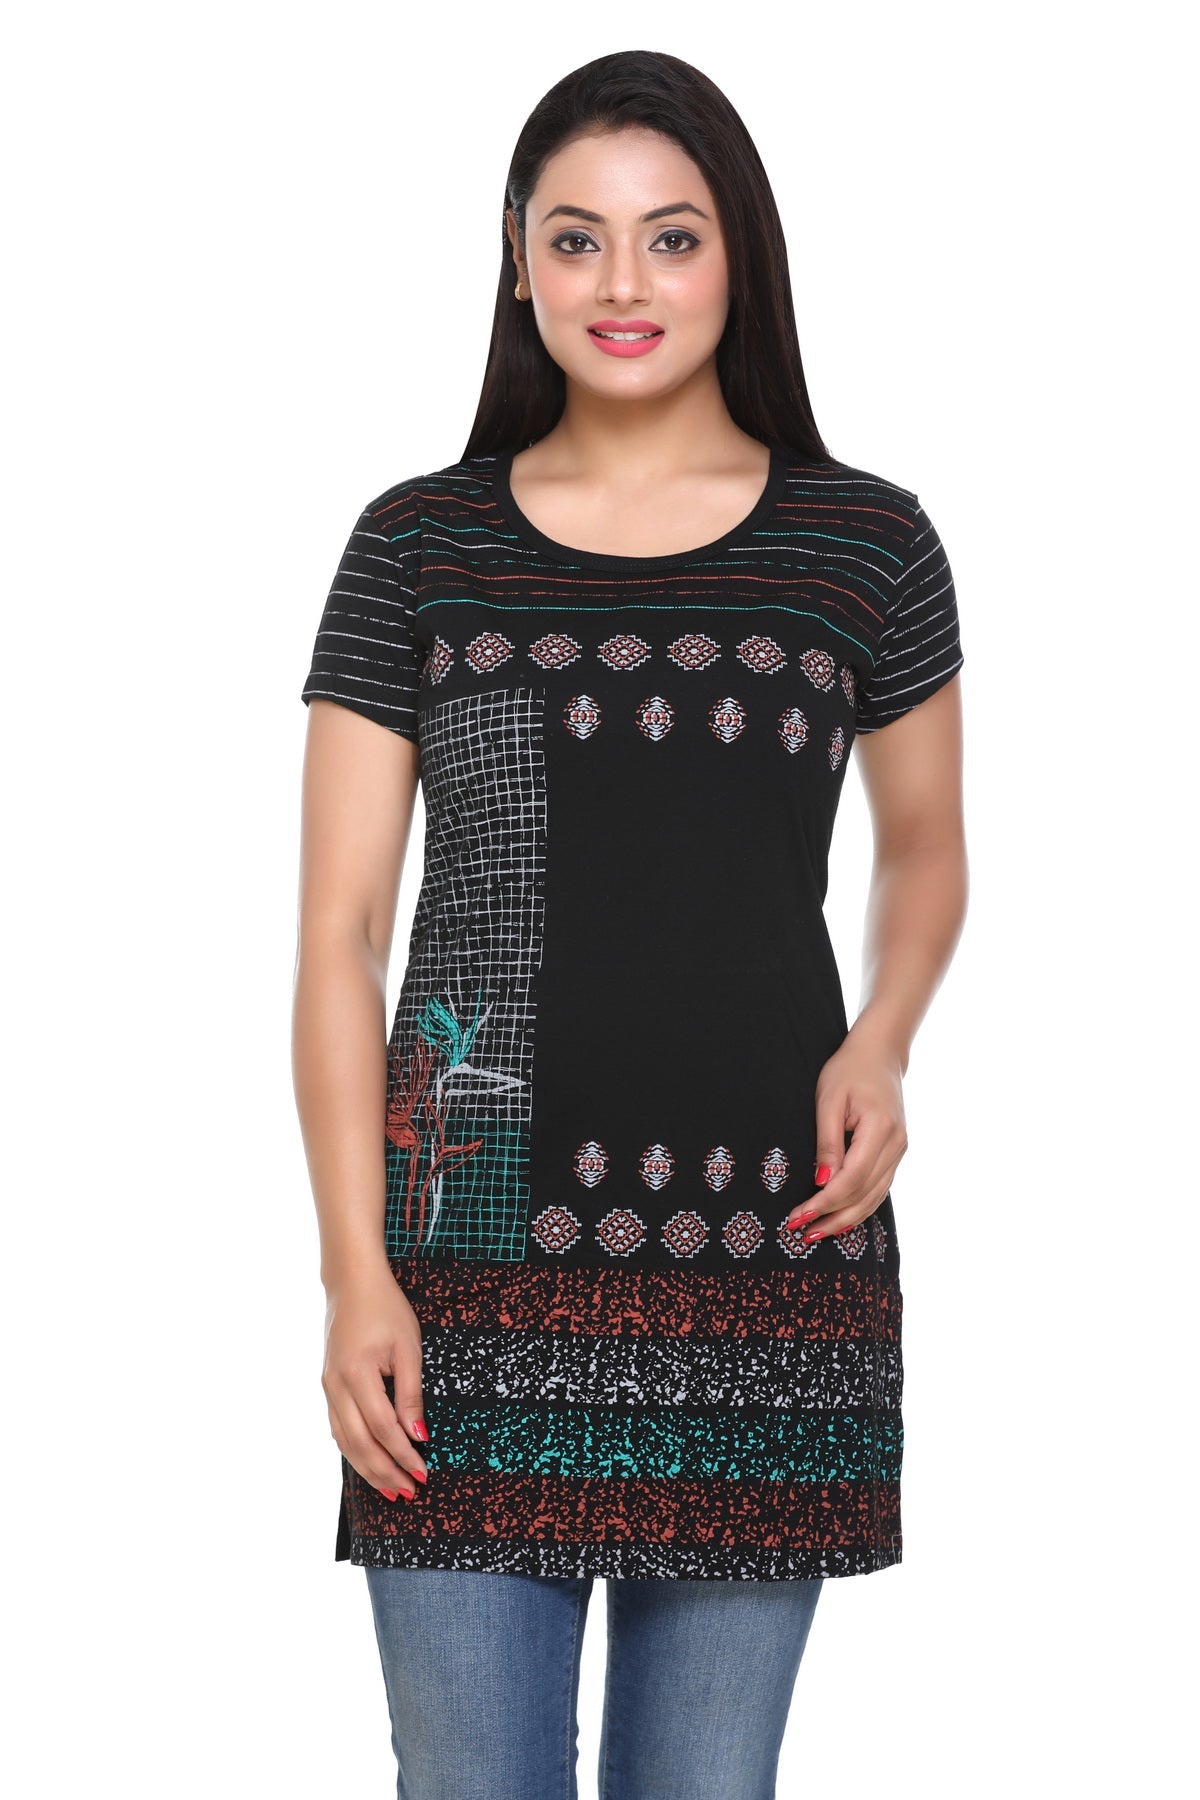 Cotton Printed Long T-shirts For Women Half Sleeve Multicolor